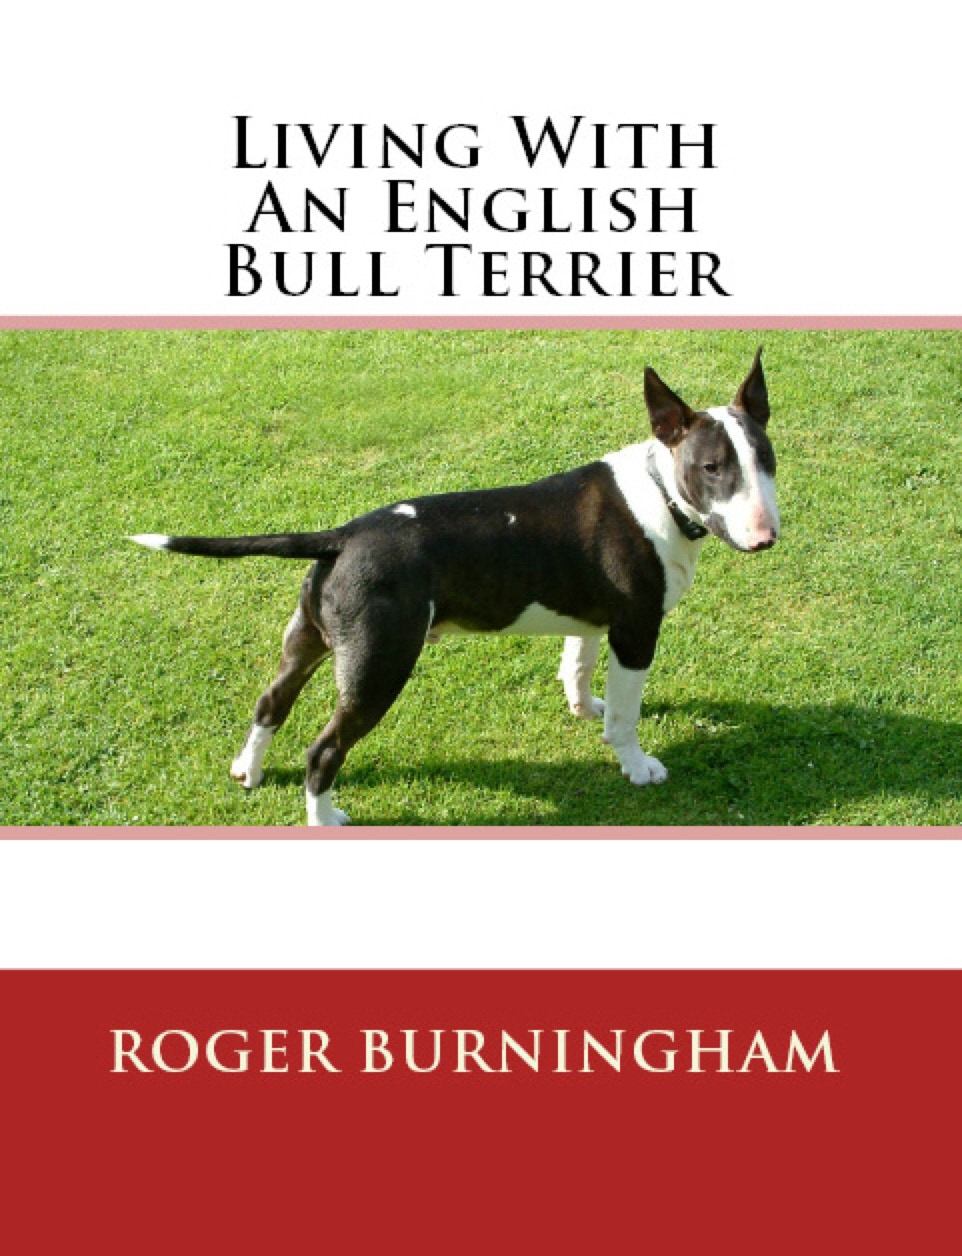 eBook | Living with an English Bull Terrier